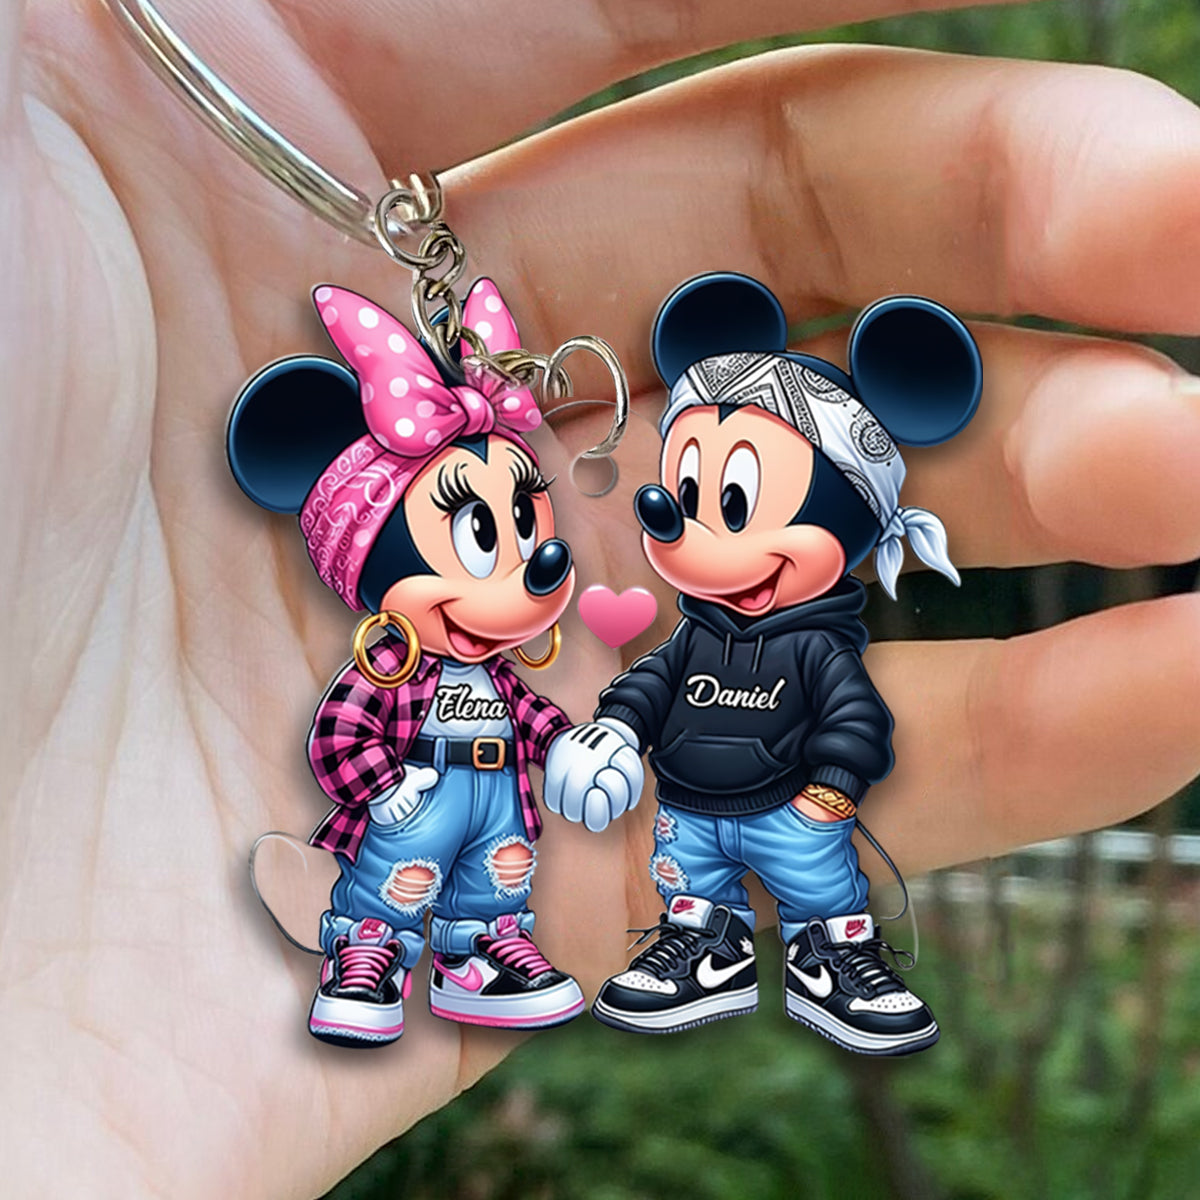 Mouse Couple - Personalized Mouse Keychain